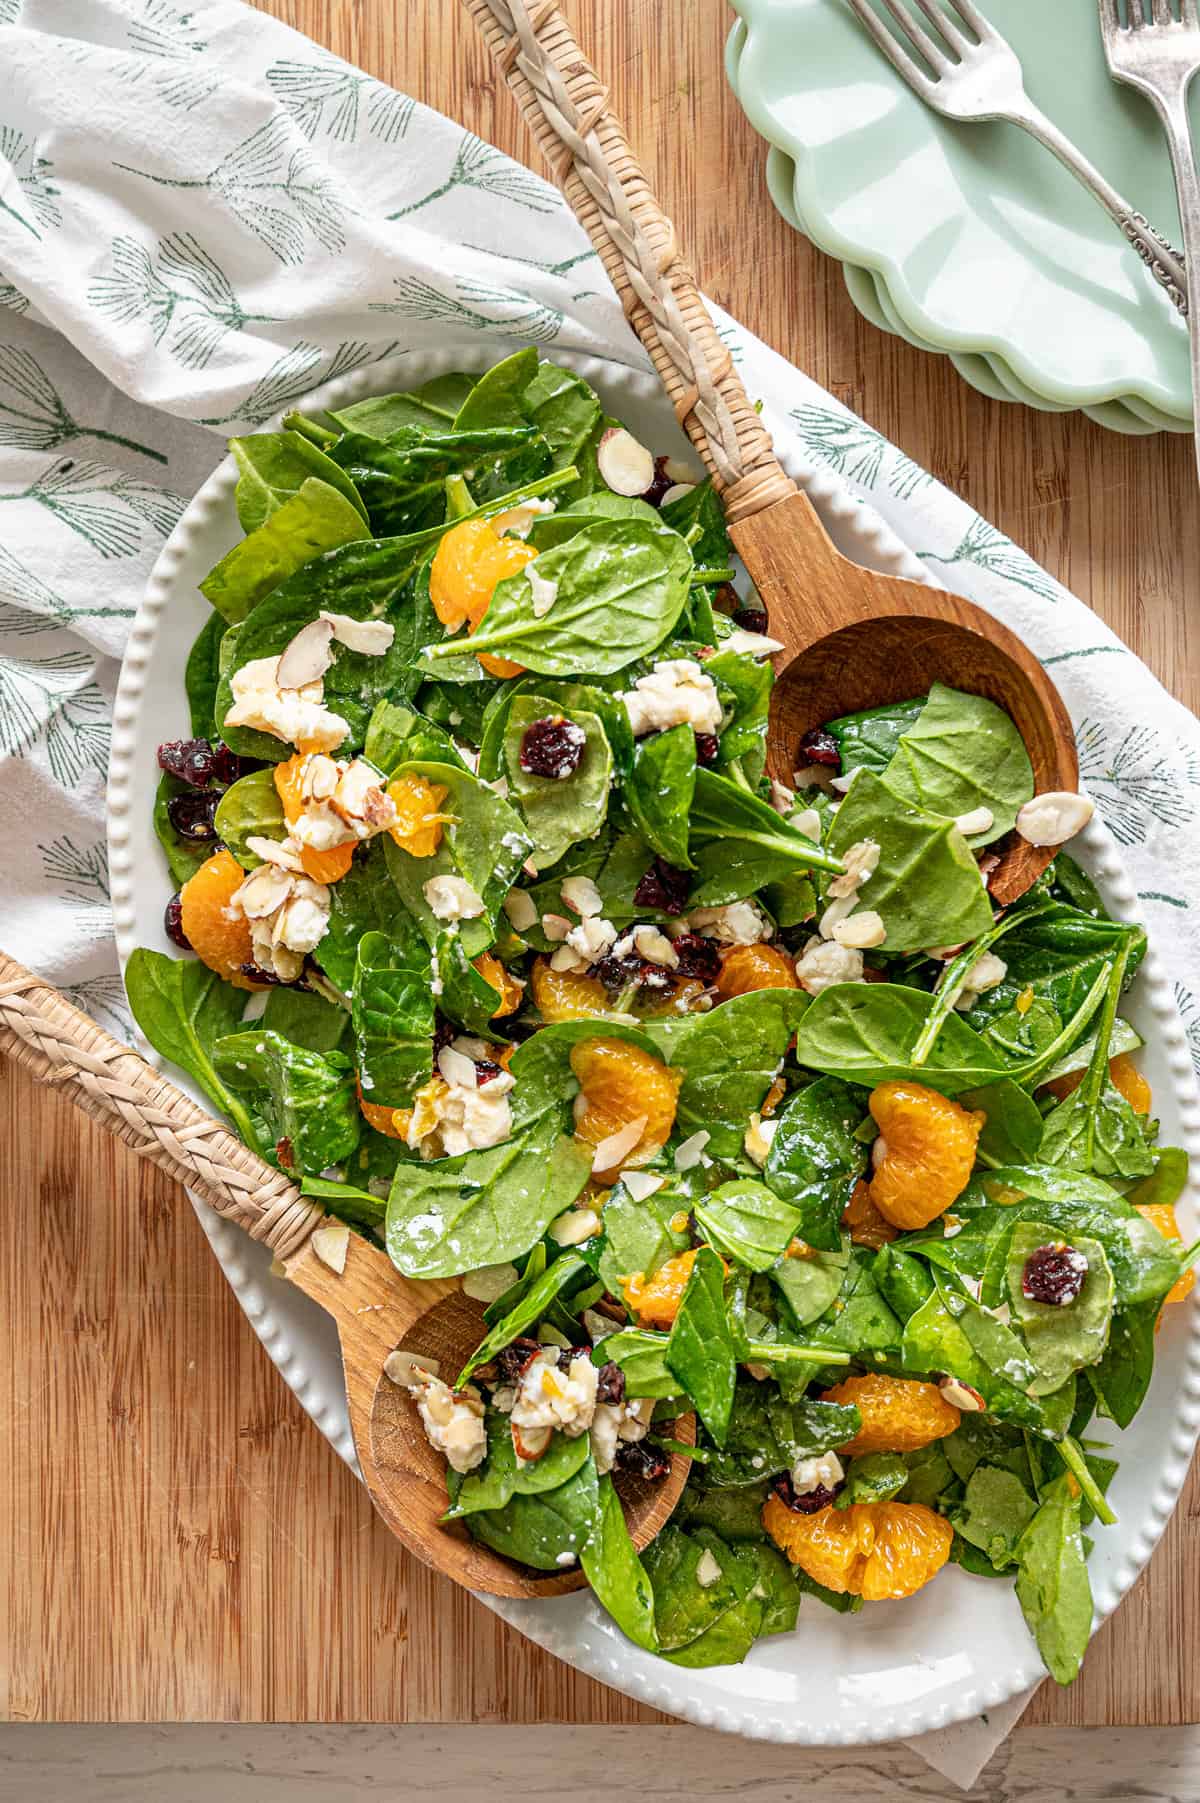 Mandarin orange spinach salad ingredients including sliced almonds, feta cheese, and dried cranberries tossed in a creamy citrus dressing on a white platter.